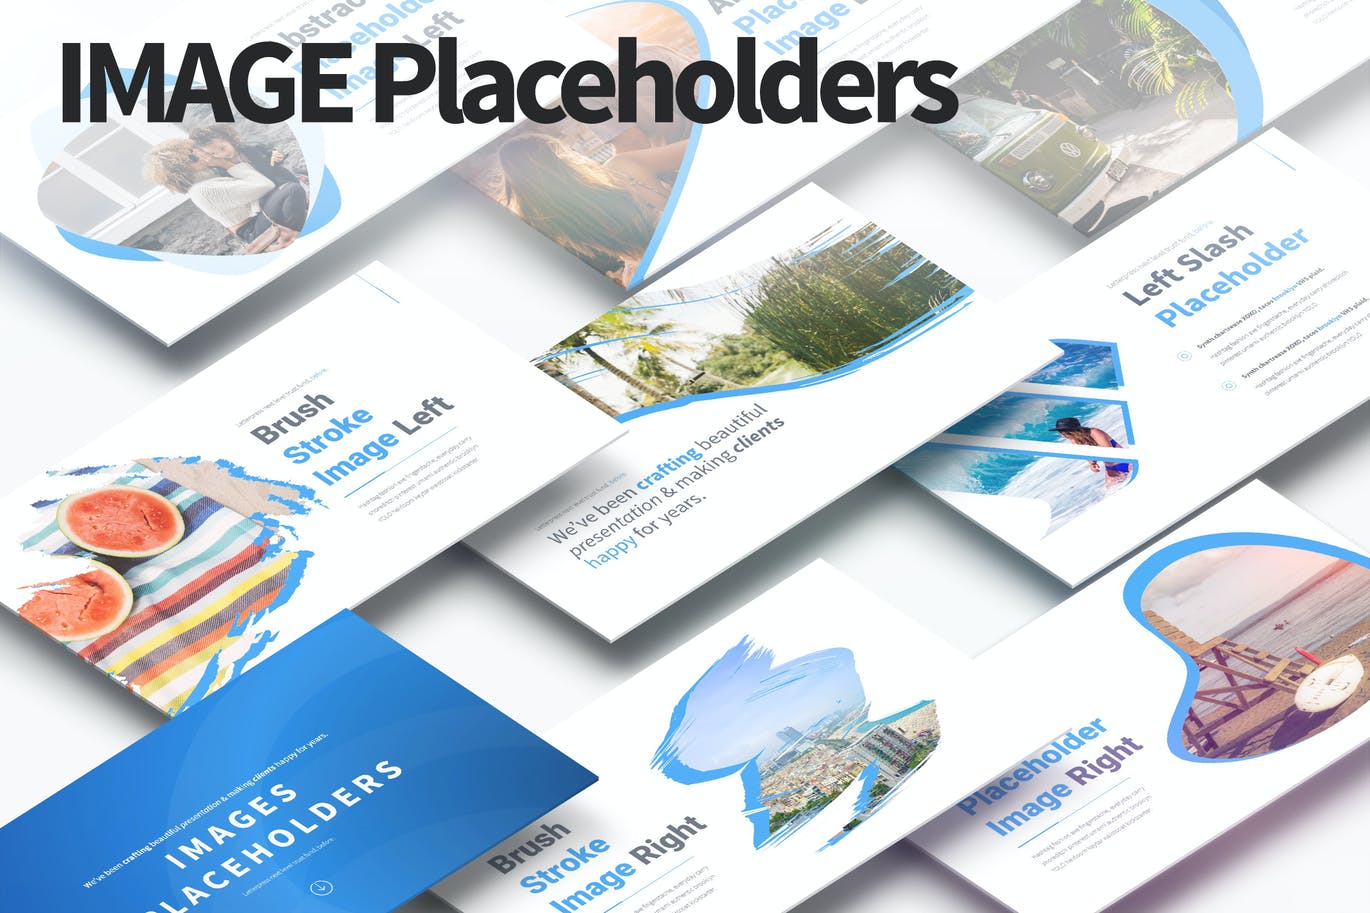 IMAGE - Placeholders PowerPoint Slides